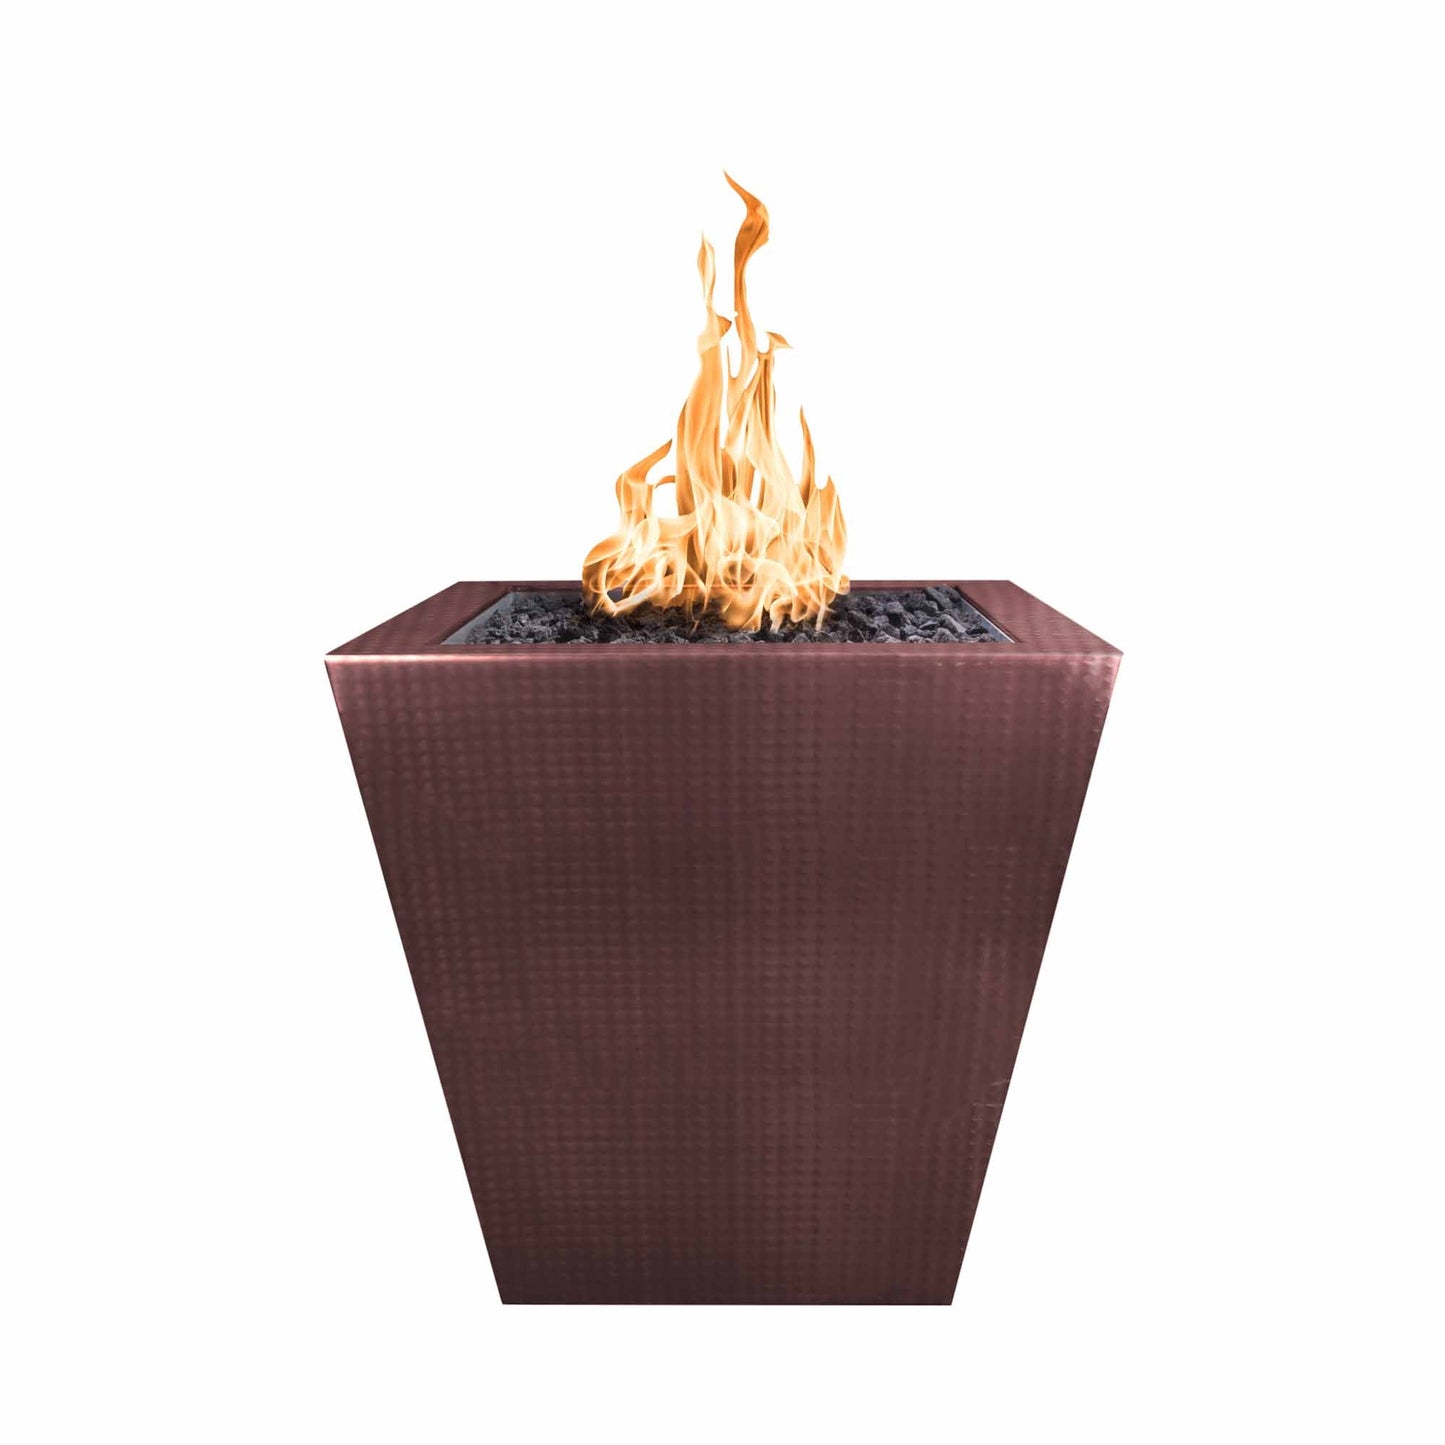 The Outdoor Plus Square Vista 24" Corten Steel Liquid Propane Fire Pit with 110V Electronic Ignition